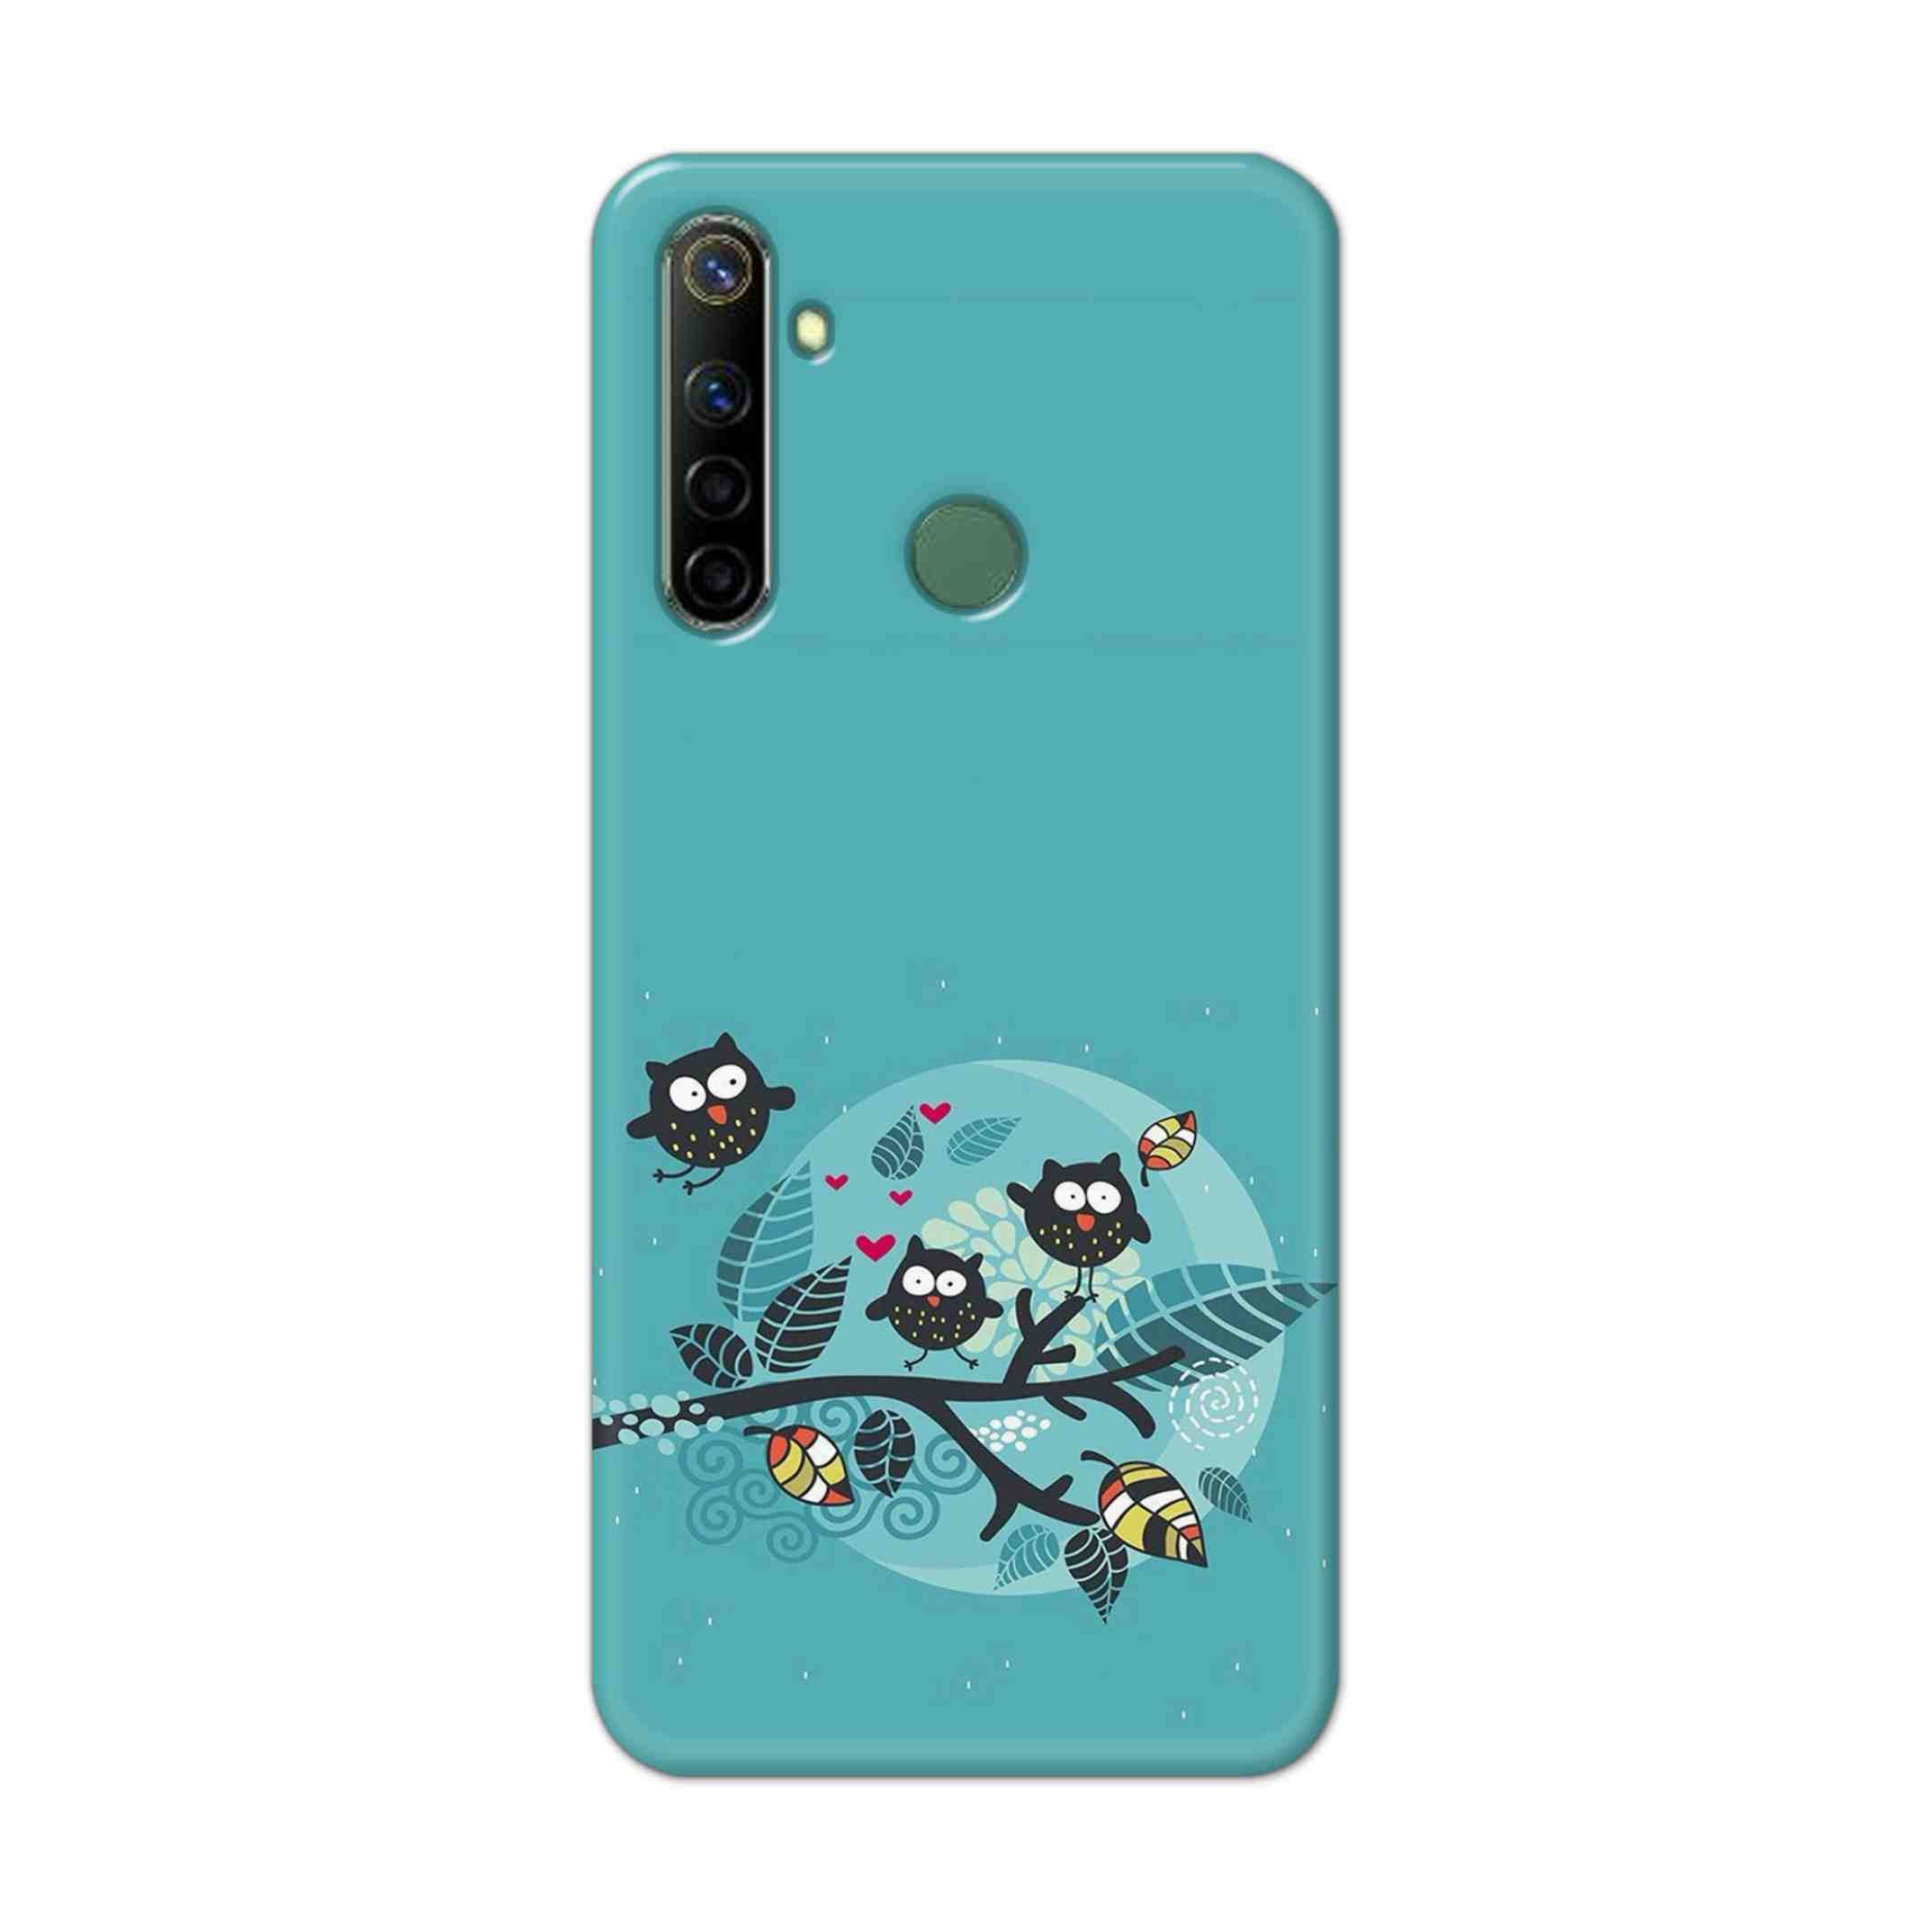 Buy Owl Hard Back Mobile Phone Case Cover For Realme Narzo 10a Online